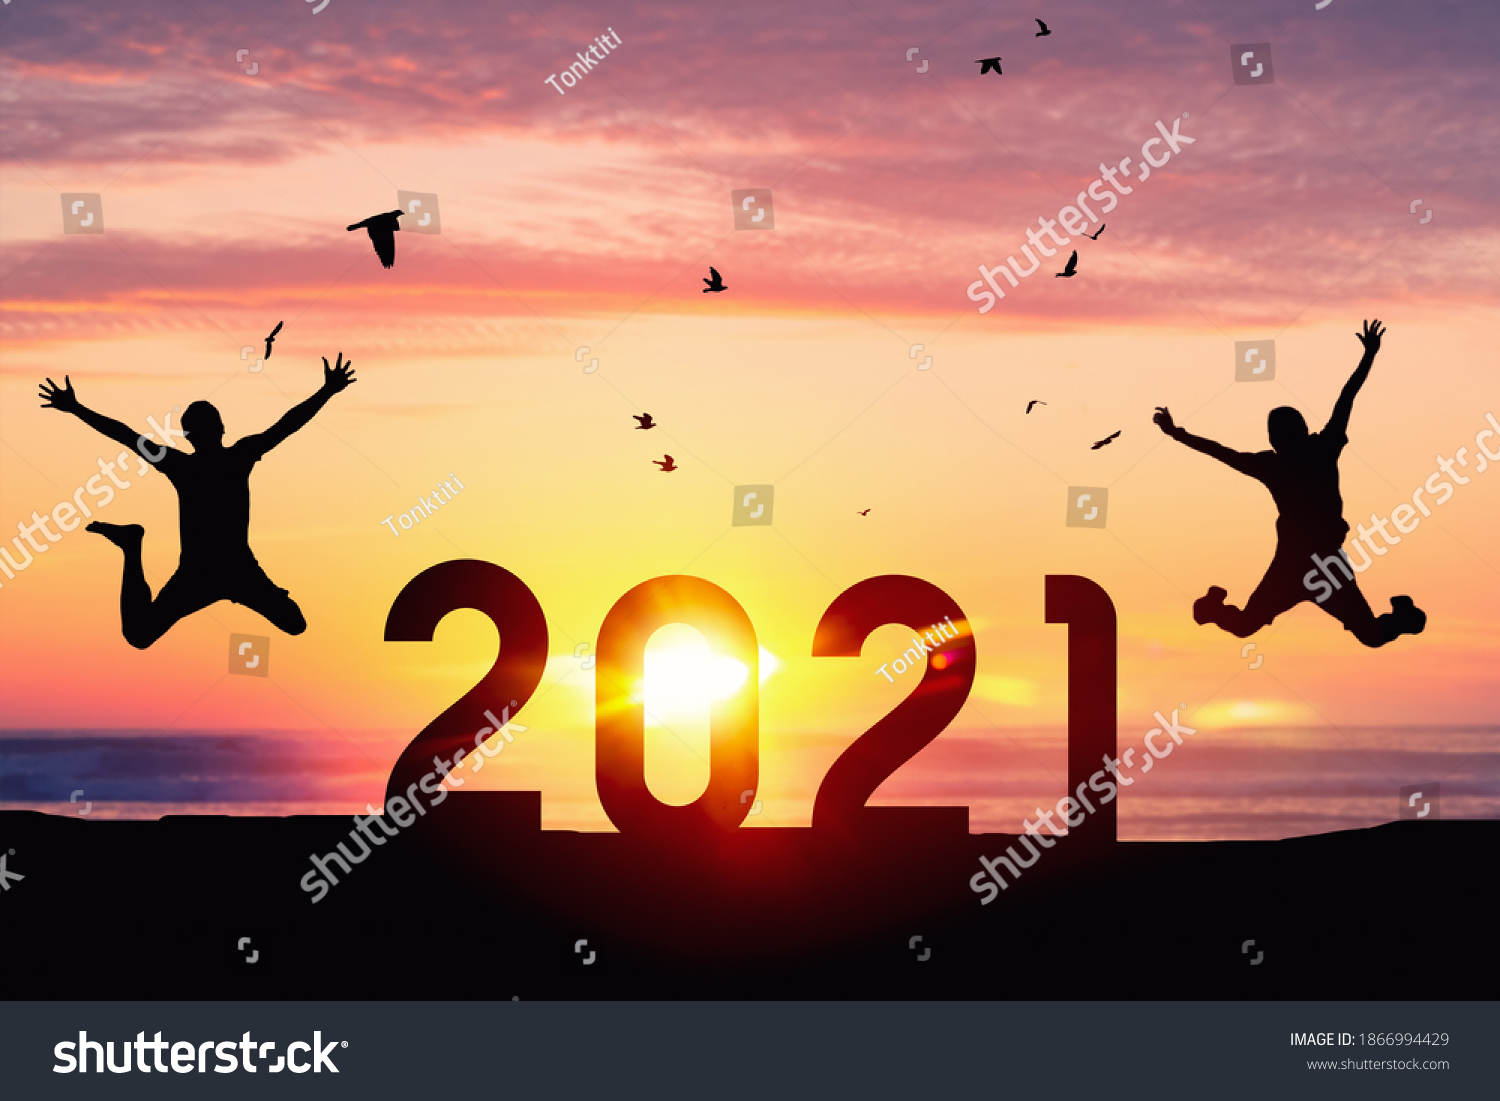 Silhouette men jumping and birds flying on sunset sky at top of mountain and number like 2021 abstract background. Happy new year and holiday celebration concept. Vintage tone filter color style. #1866994429